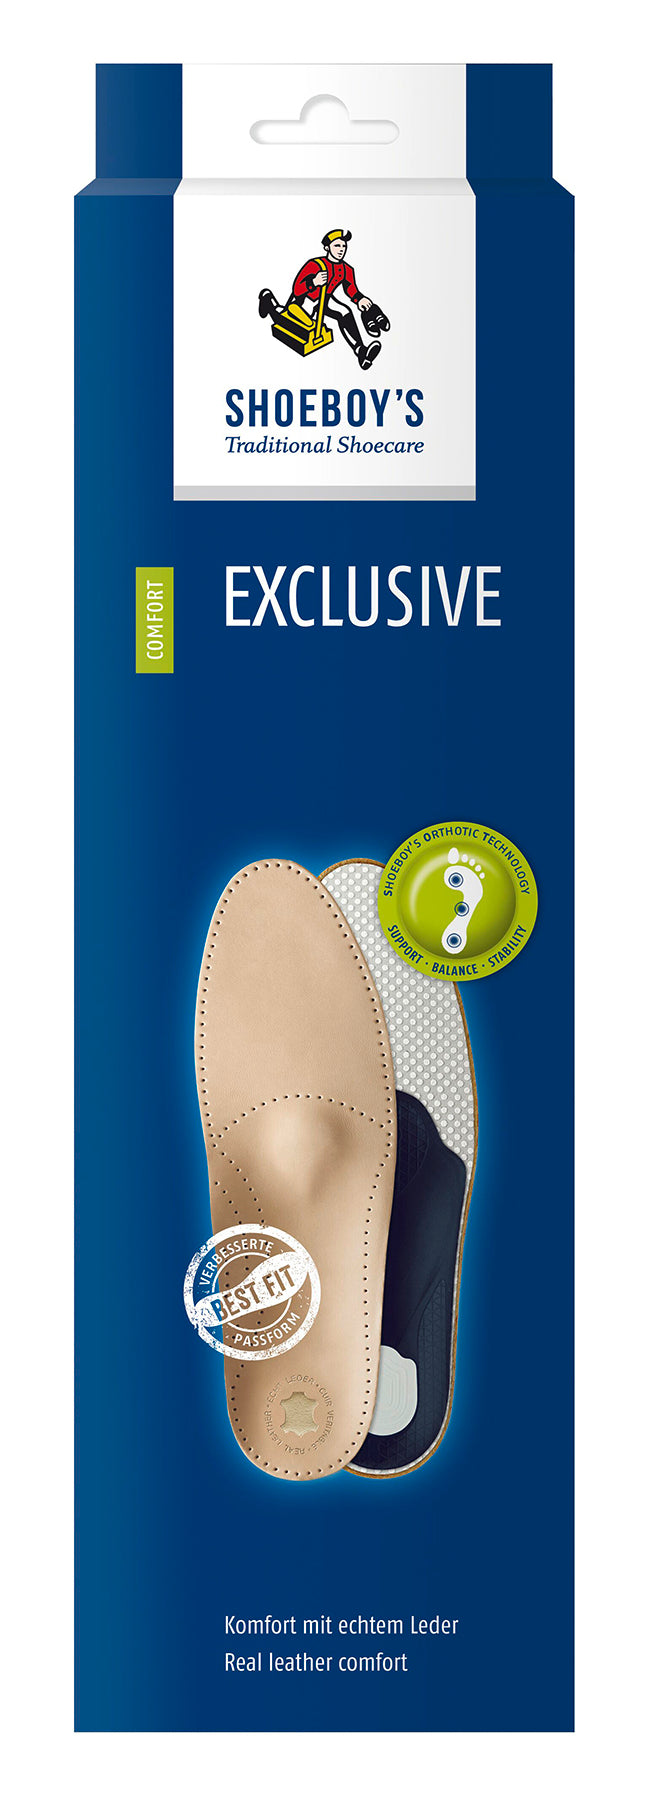 Shoeboy's Exclusive Insoles - Absorbs Moisture, Reduces Aching & Odor, Antislip, Breathable Foam Cushioning, Activated Carbon - Women's - Trustables